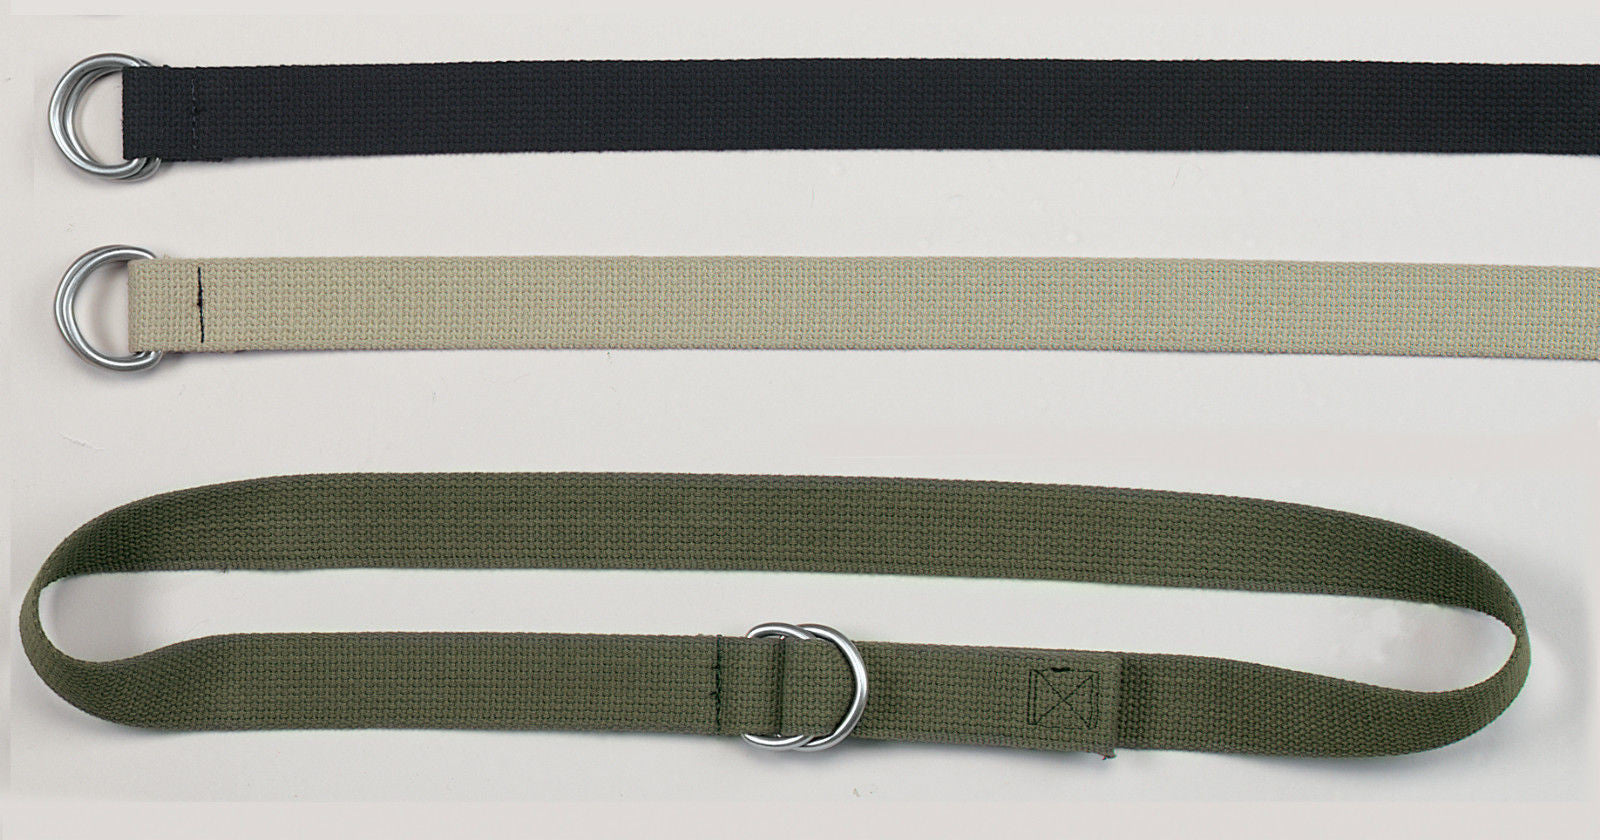 Rothco Military D-Ring Expedition Web Belt